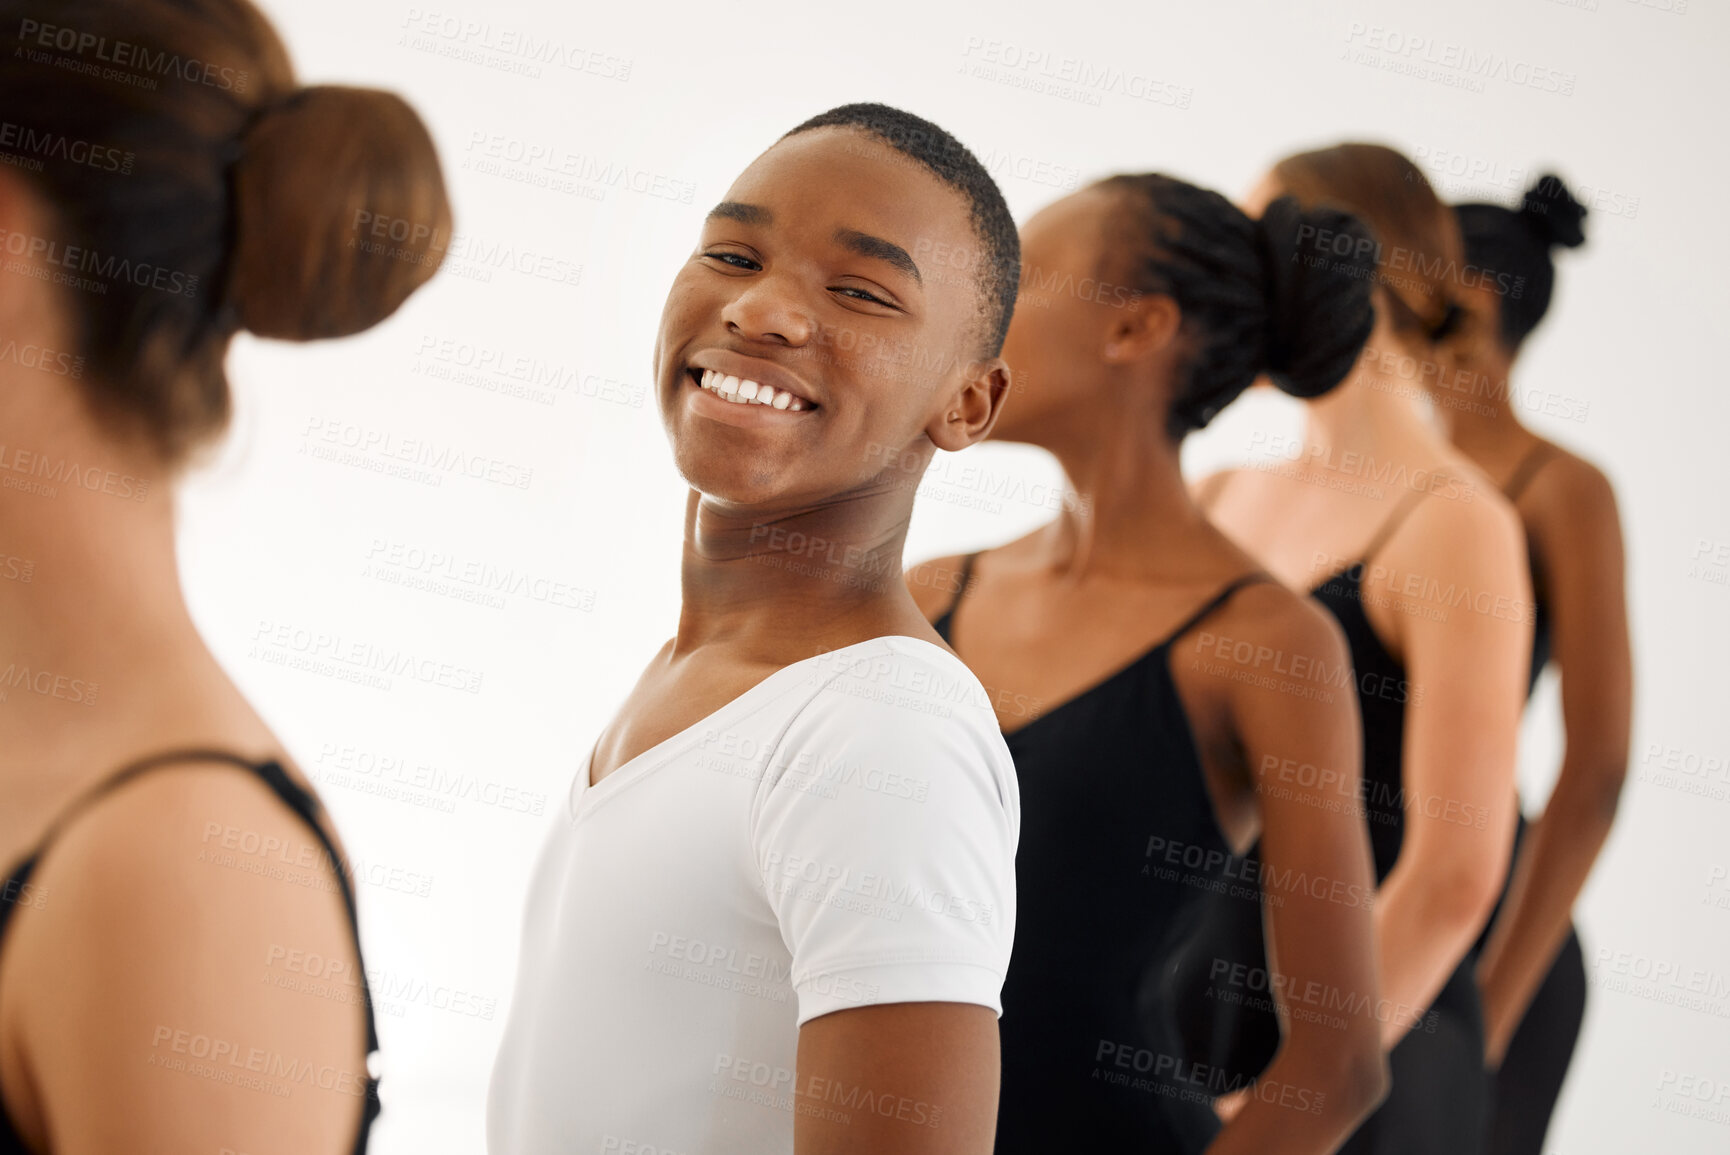 Buy stock photo Shot of a group of ballet dancers about to start their routine